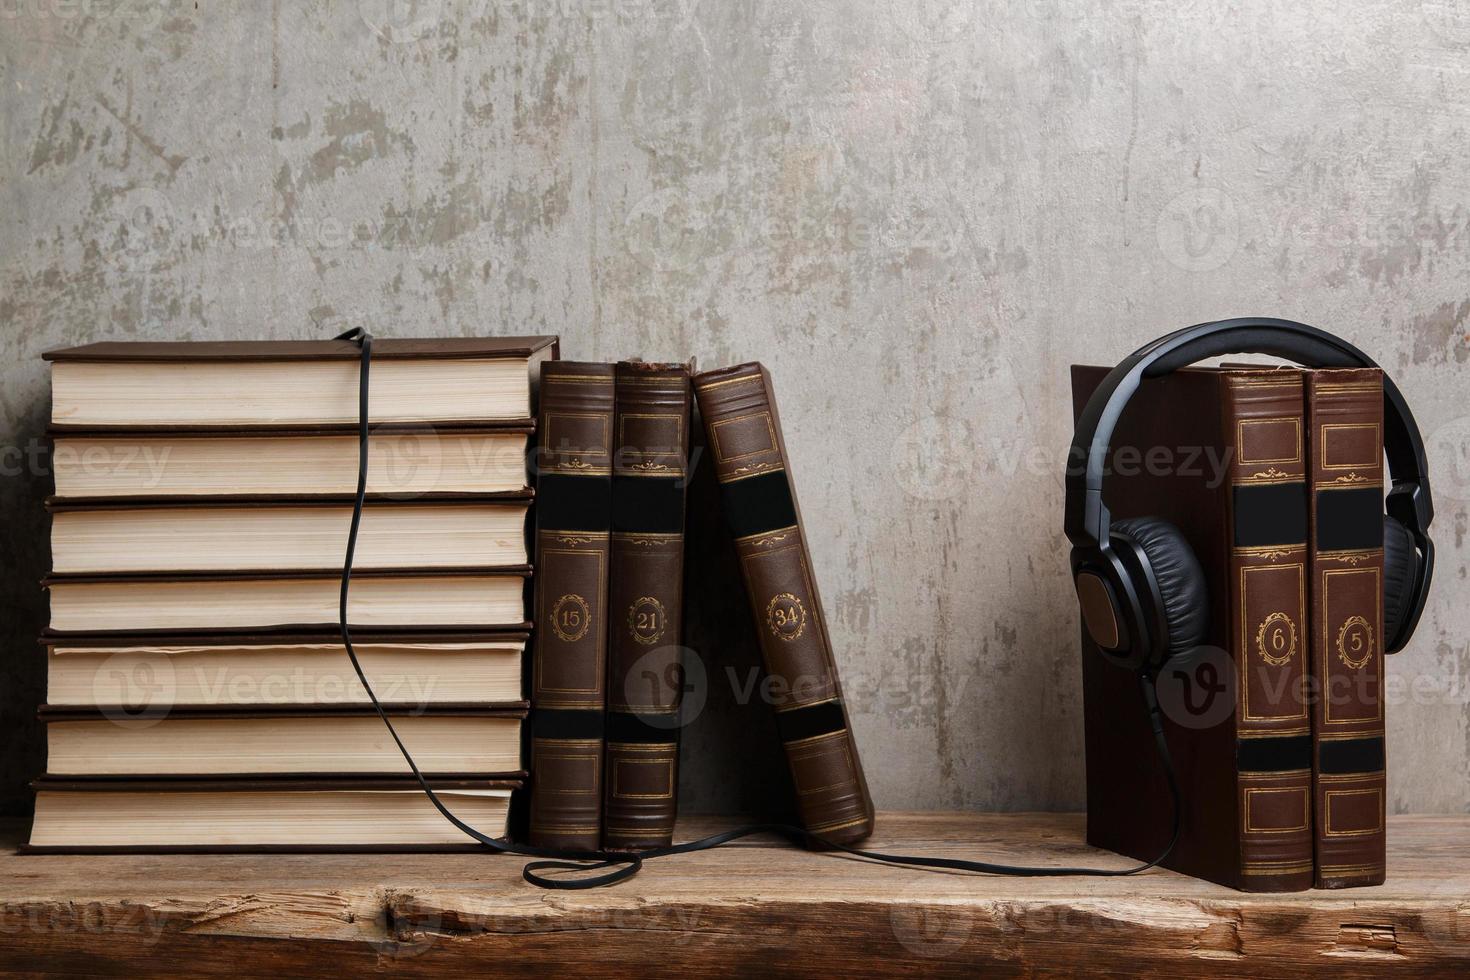 Audiobooks concept with books and headphone photo